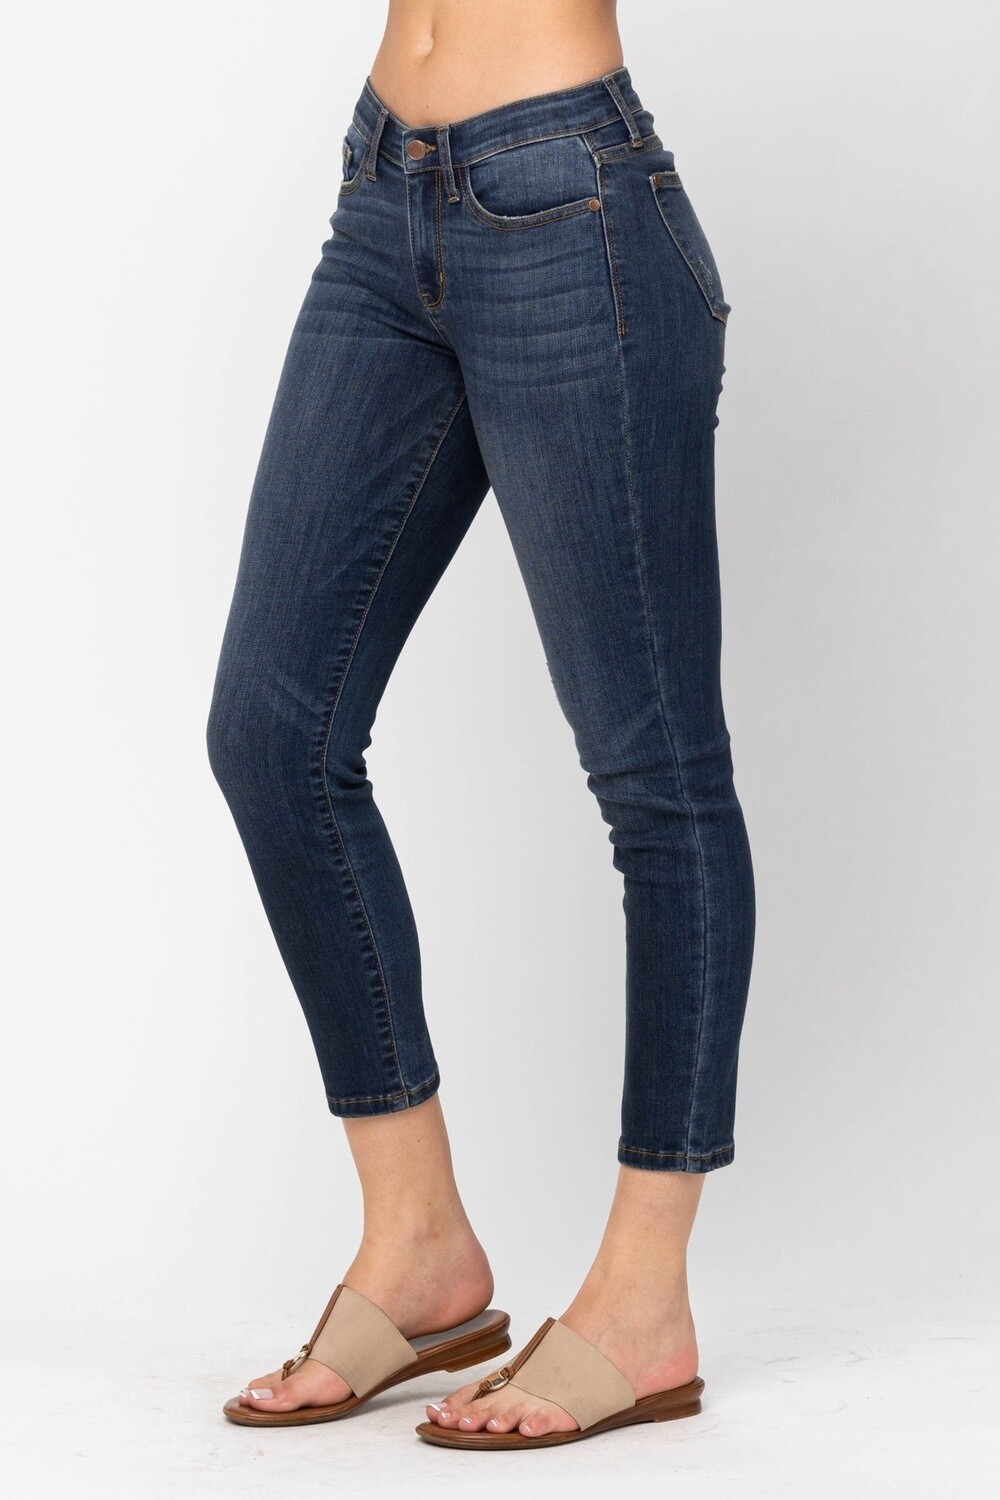 Women's Relaxed Fit Petite Jeans #82251